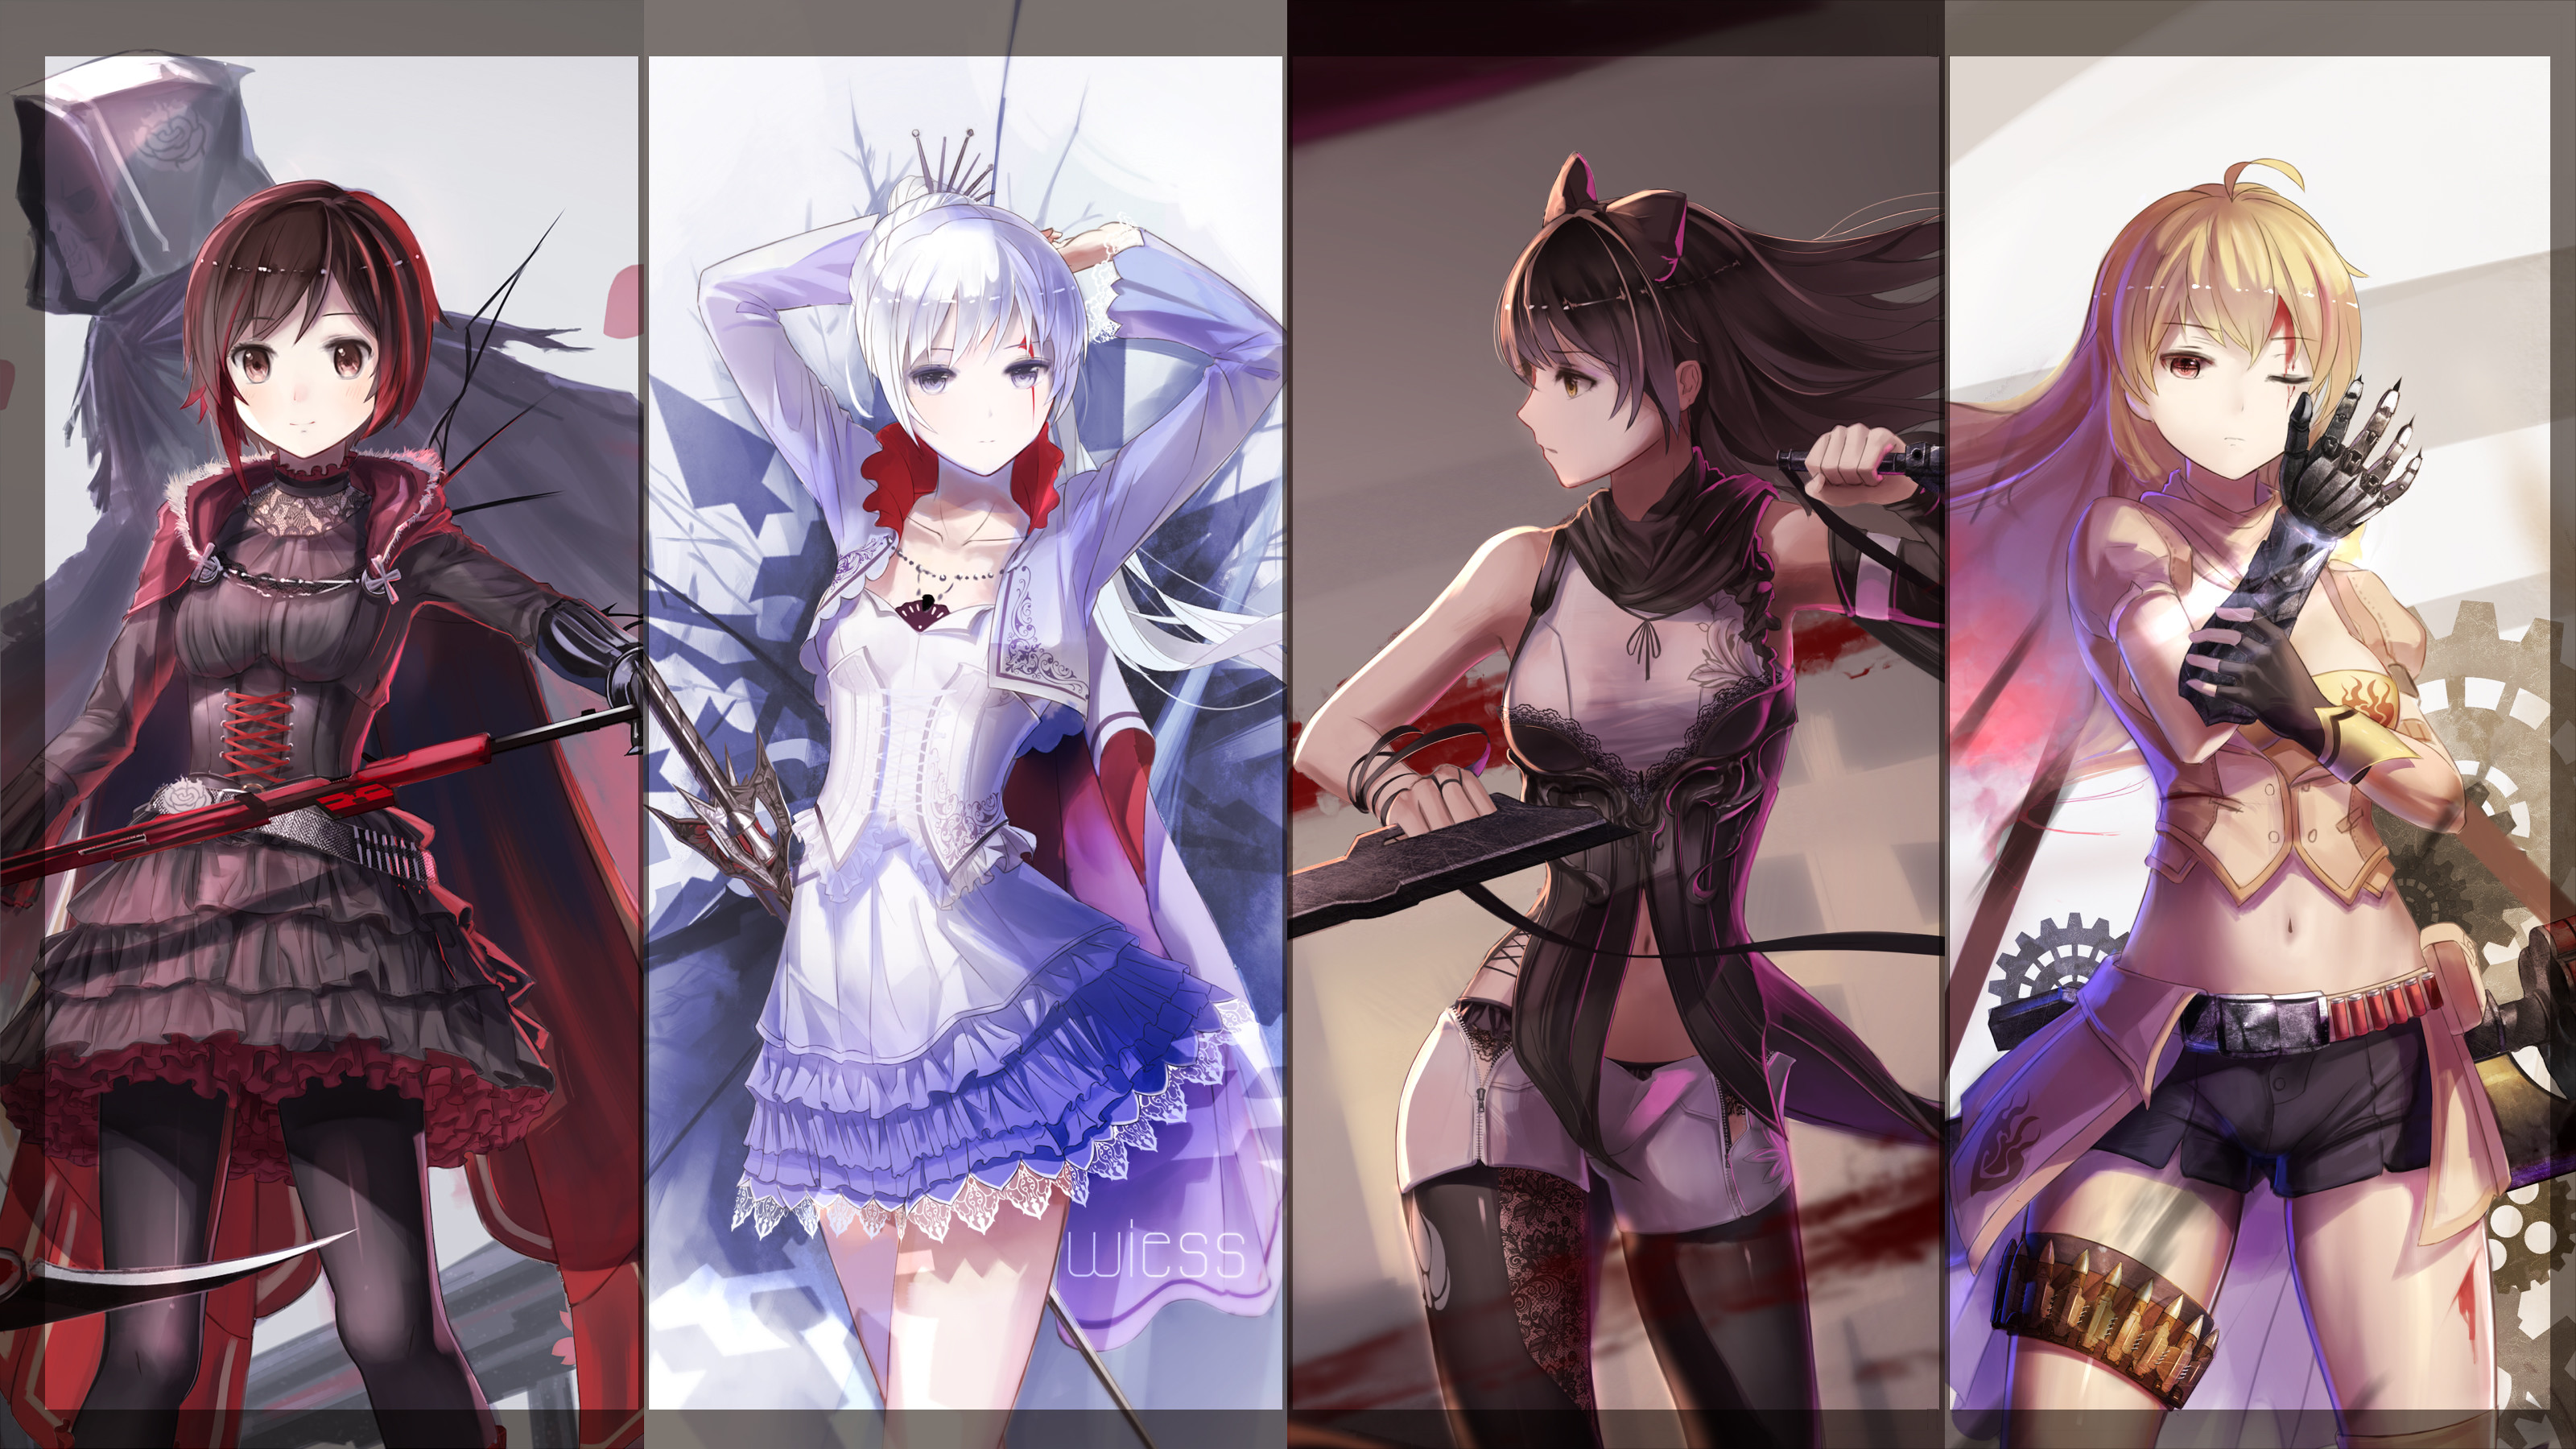 3200x1800 Cool RWBY wallpaper I found today.